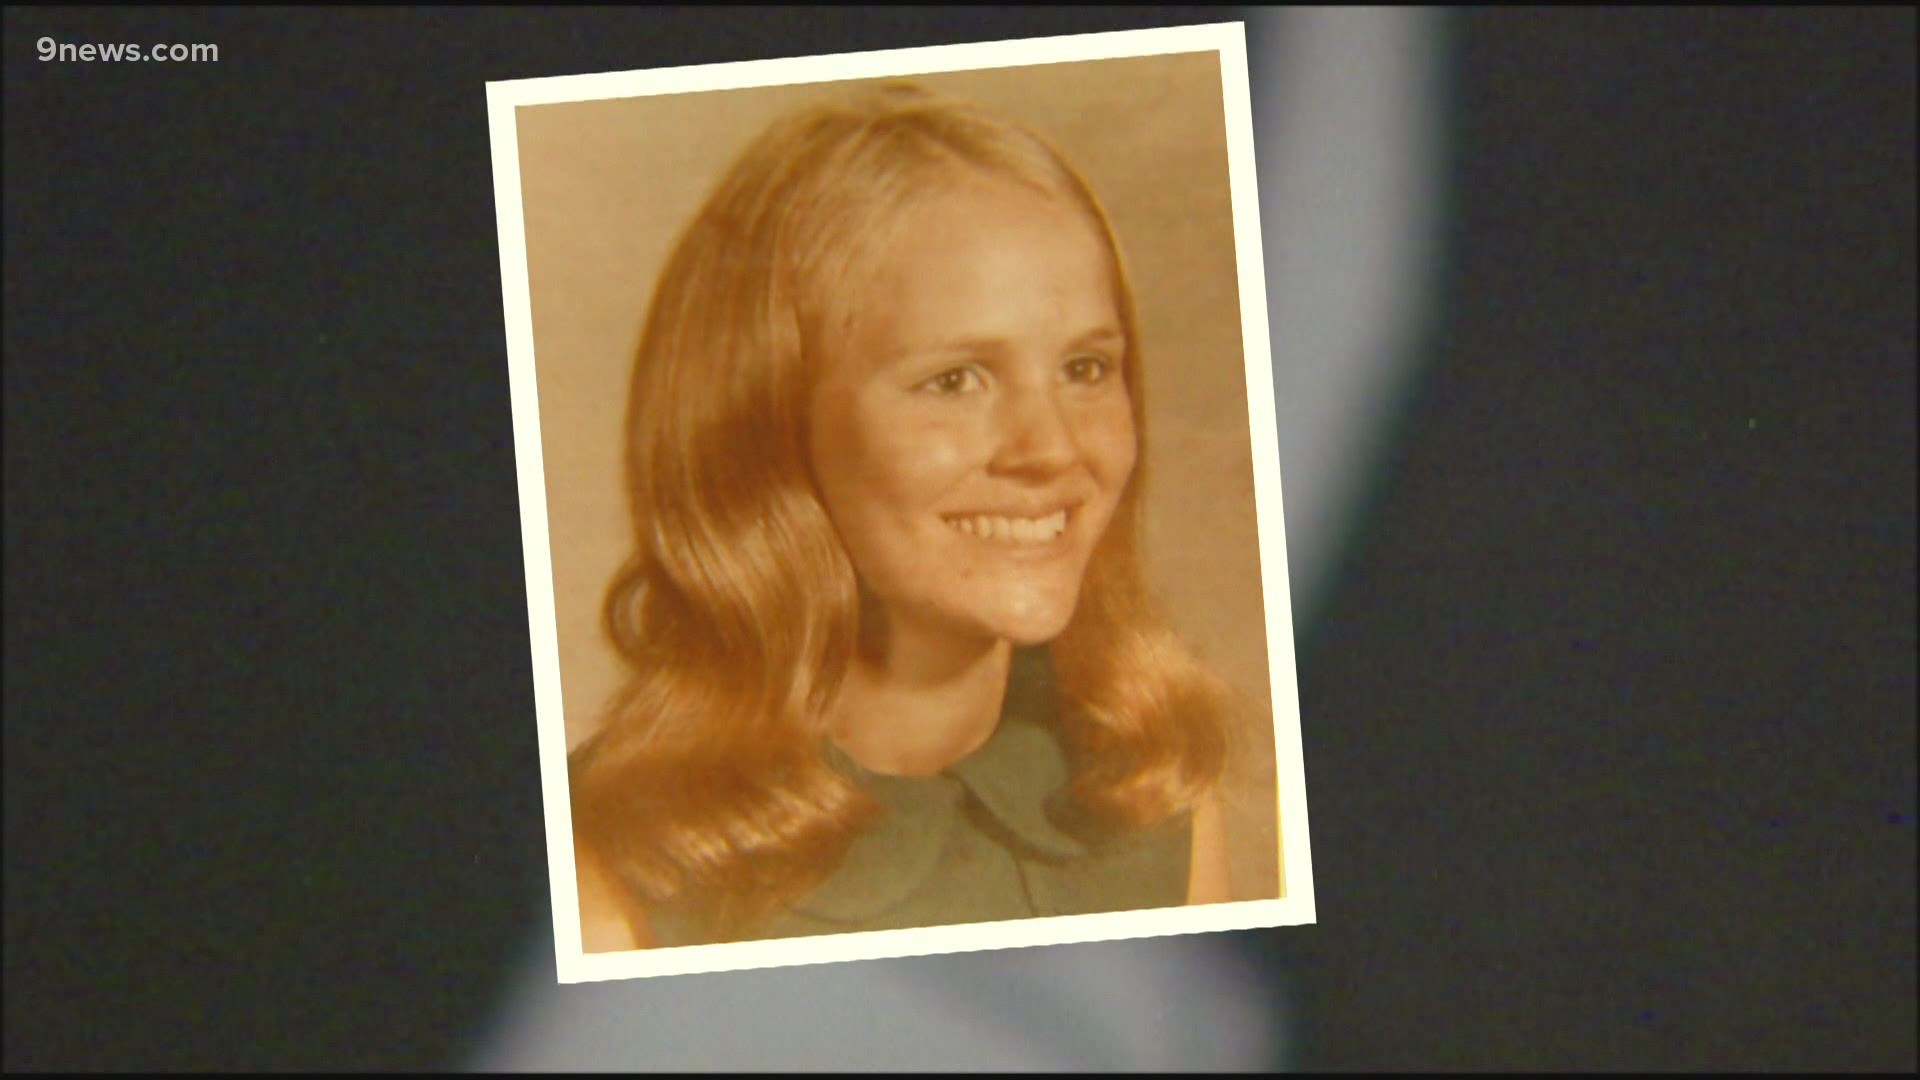 Marliee Burt was last seen in 1970, and her body was found the next day under a bridge in Deer Creek Canyon.